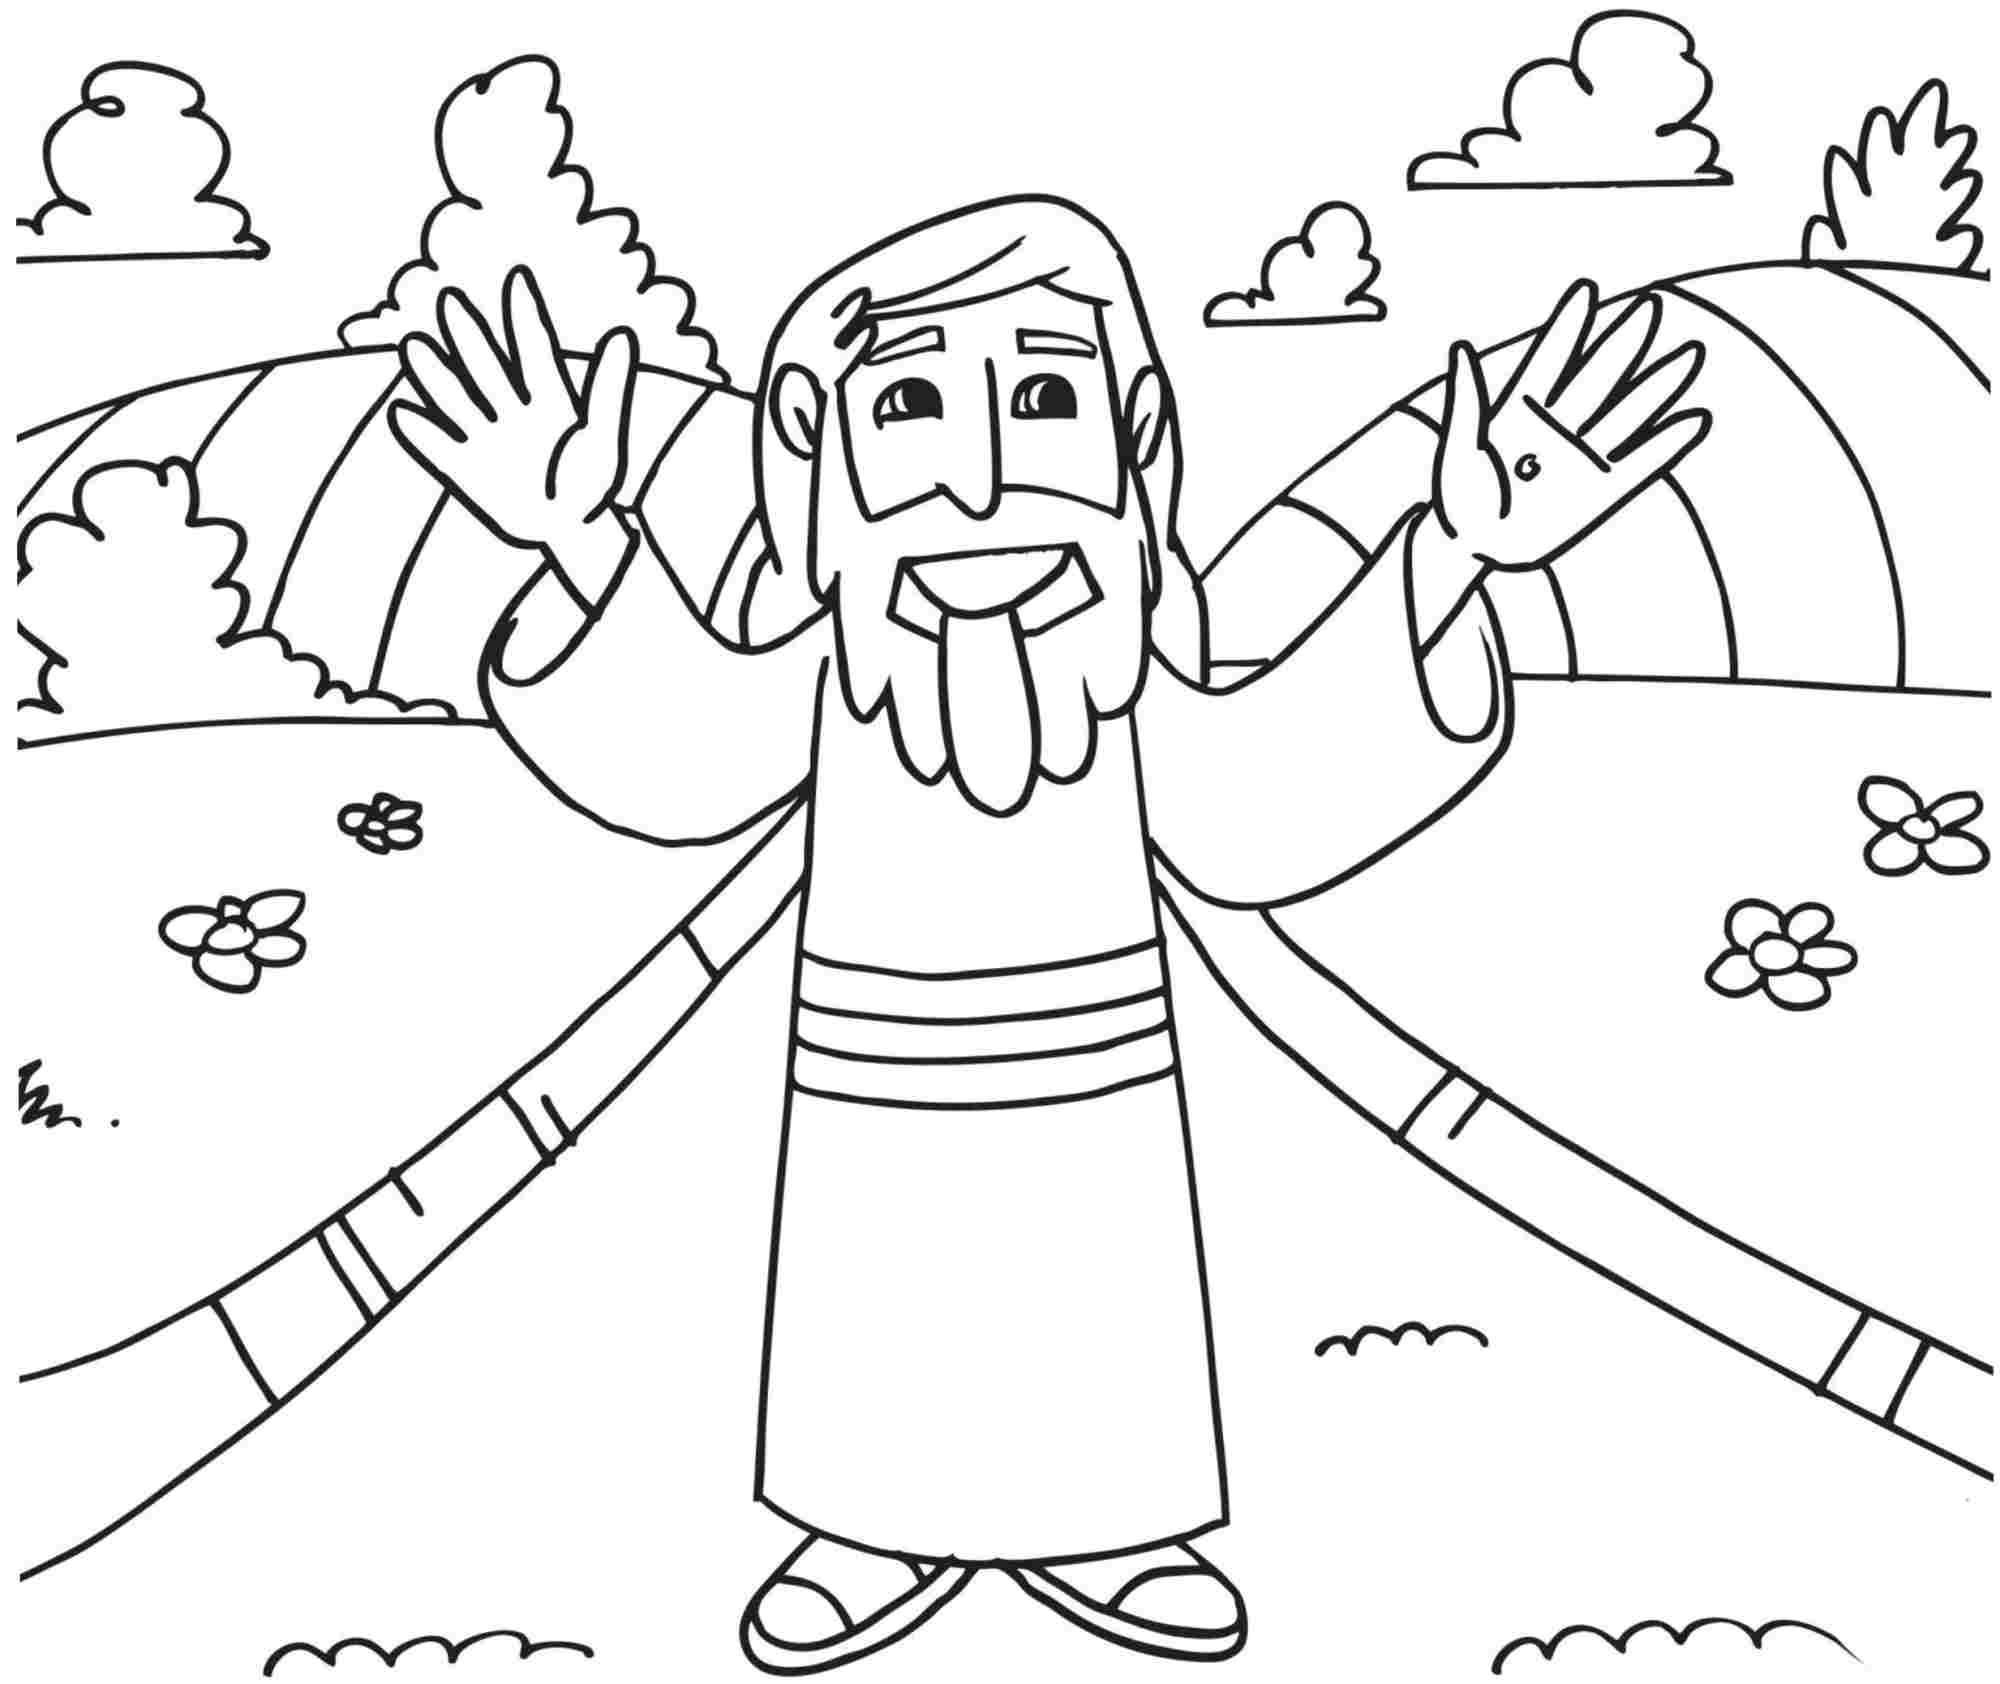 27+ Marvelous Picture of Easter Coloring Pages Religious ...